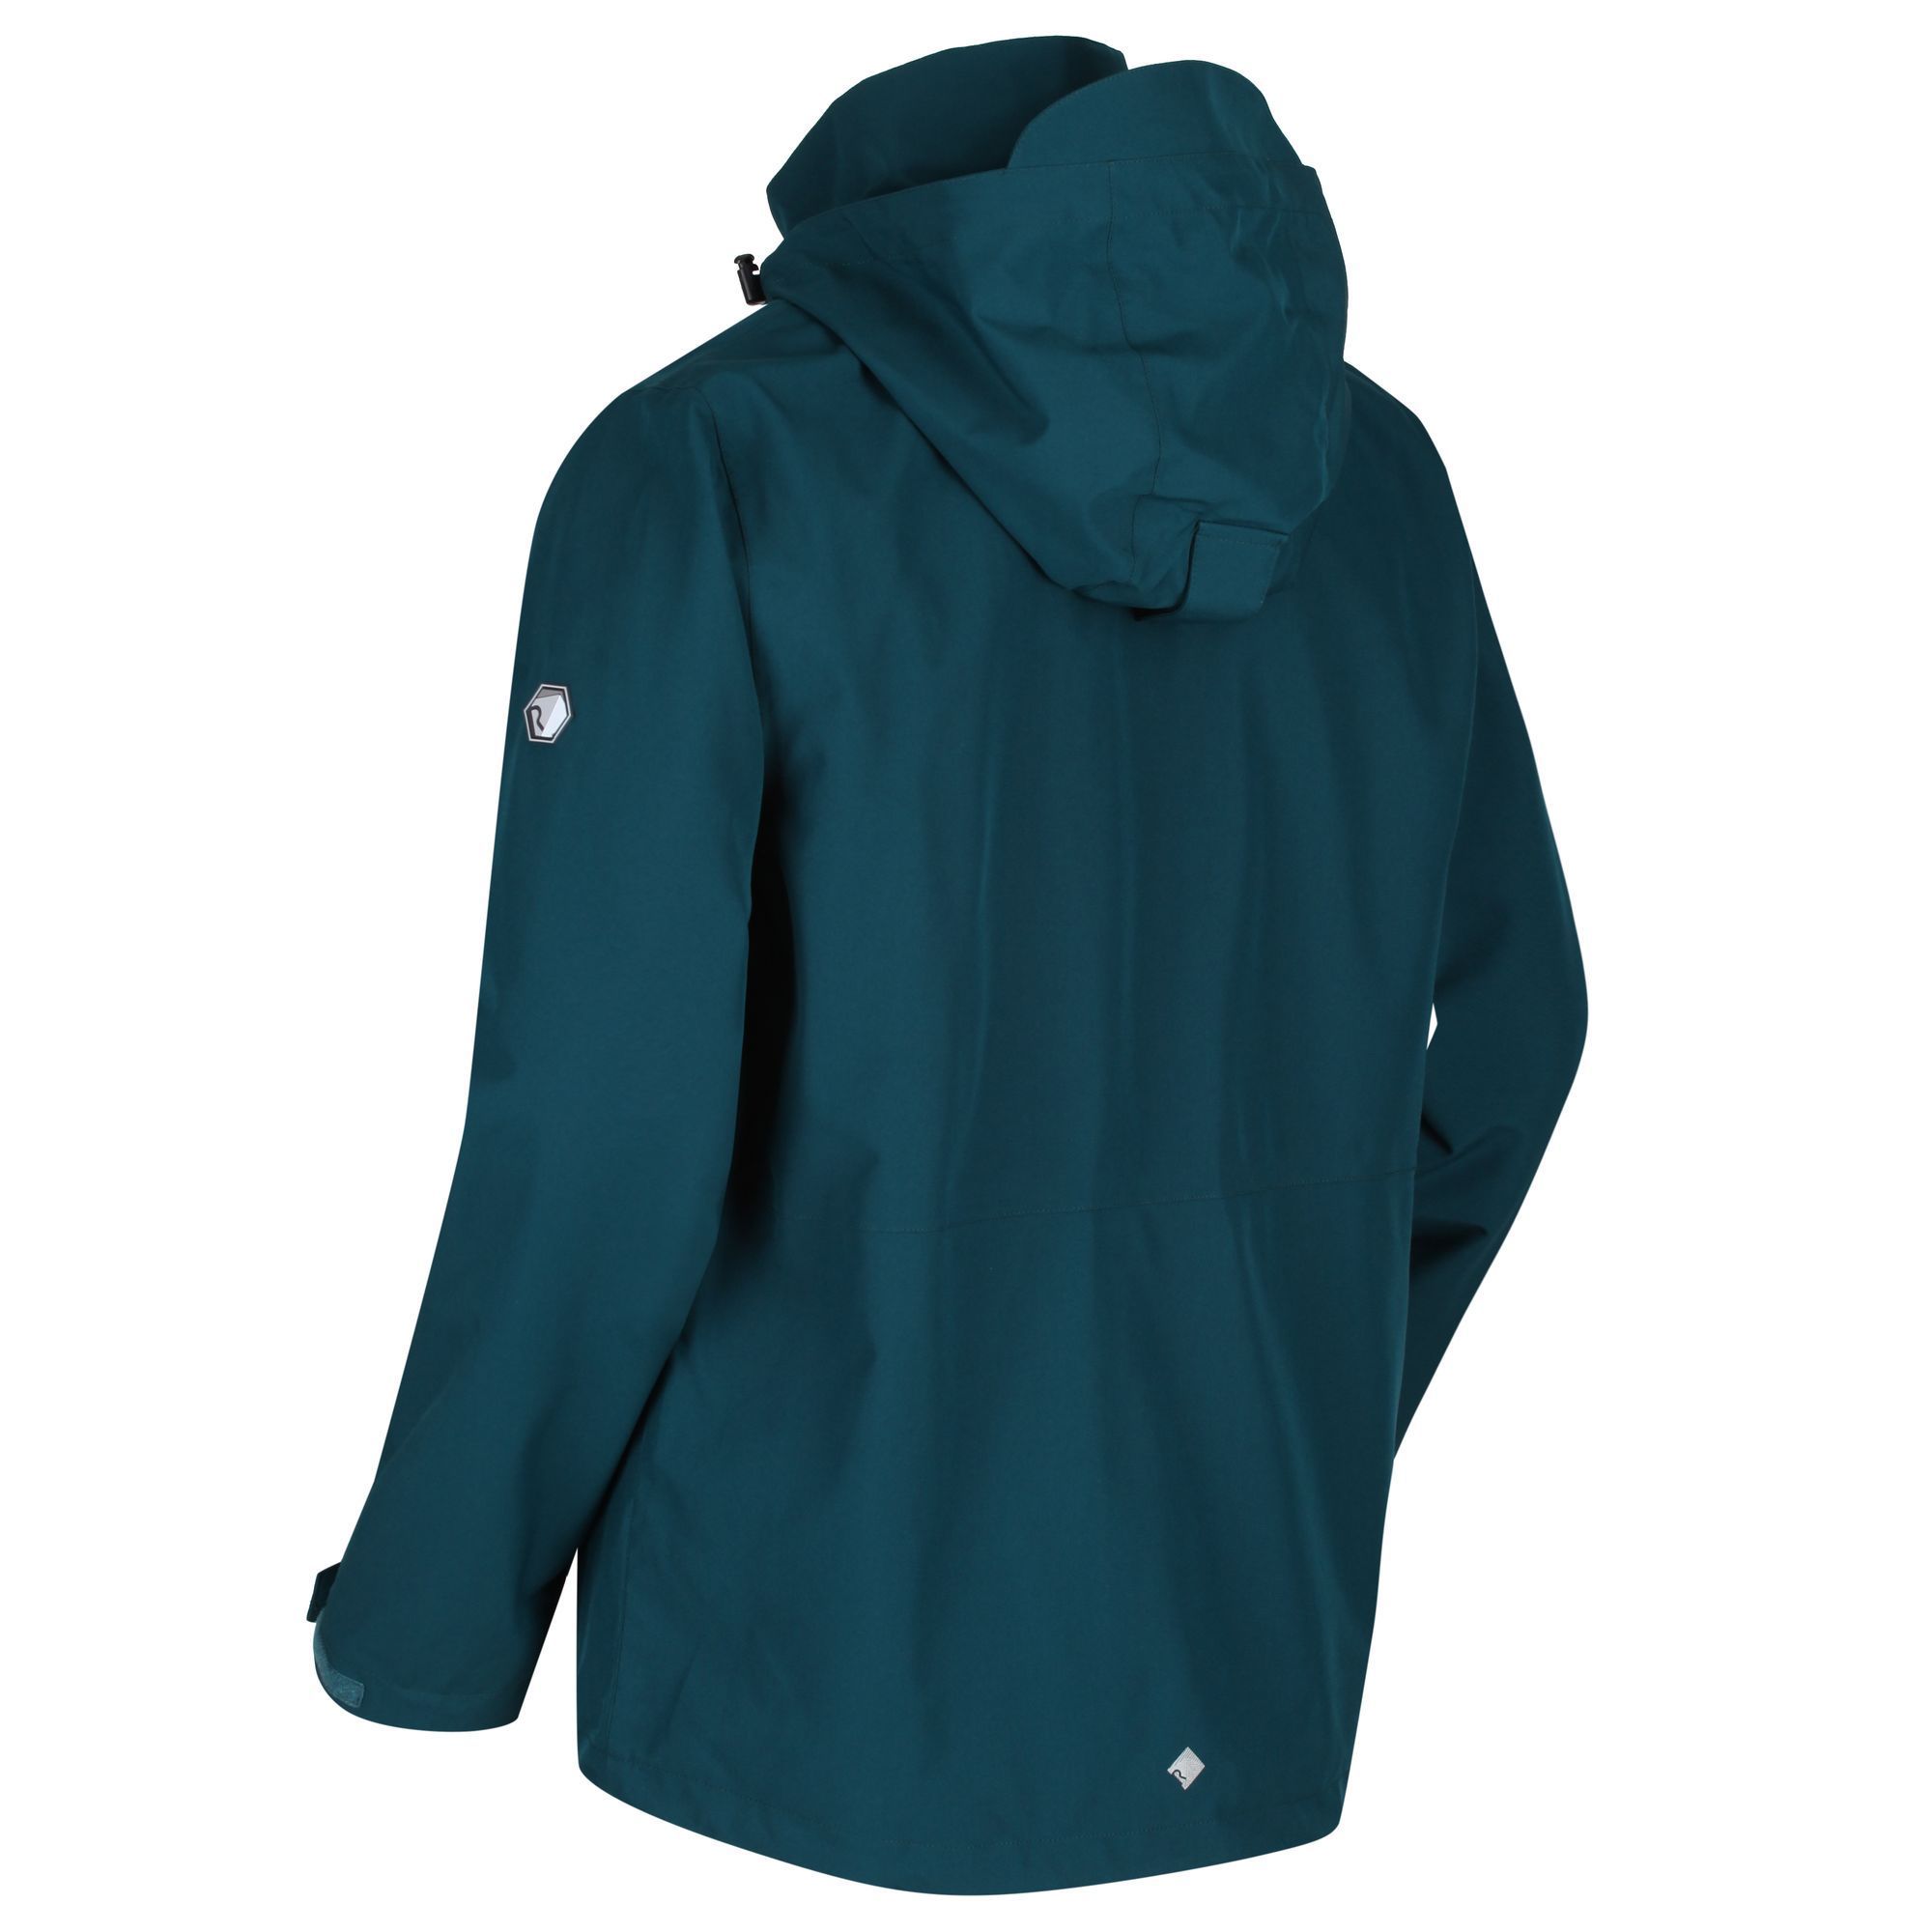 Isotex 10000 100% polyester stretch fabric. 145gsm marl fleece inner. Waterproof and breathable. Concealed hood with adjusters. 2 chest patch pockets with snap fastenings and 2 lower zipped welt pockets with stud fastening. Adjustable cuff and shockcord hem.